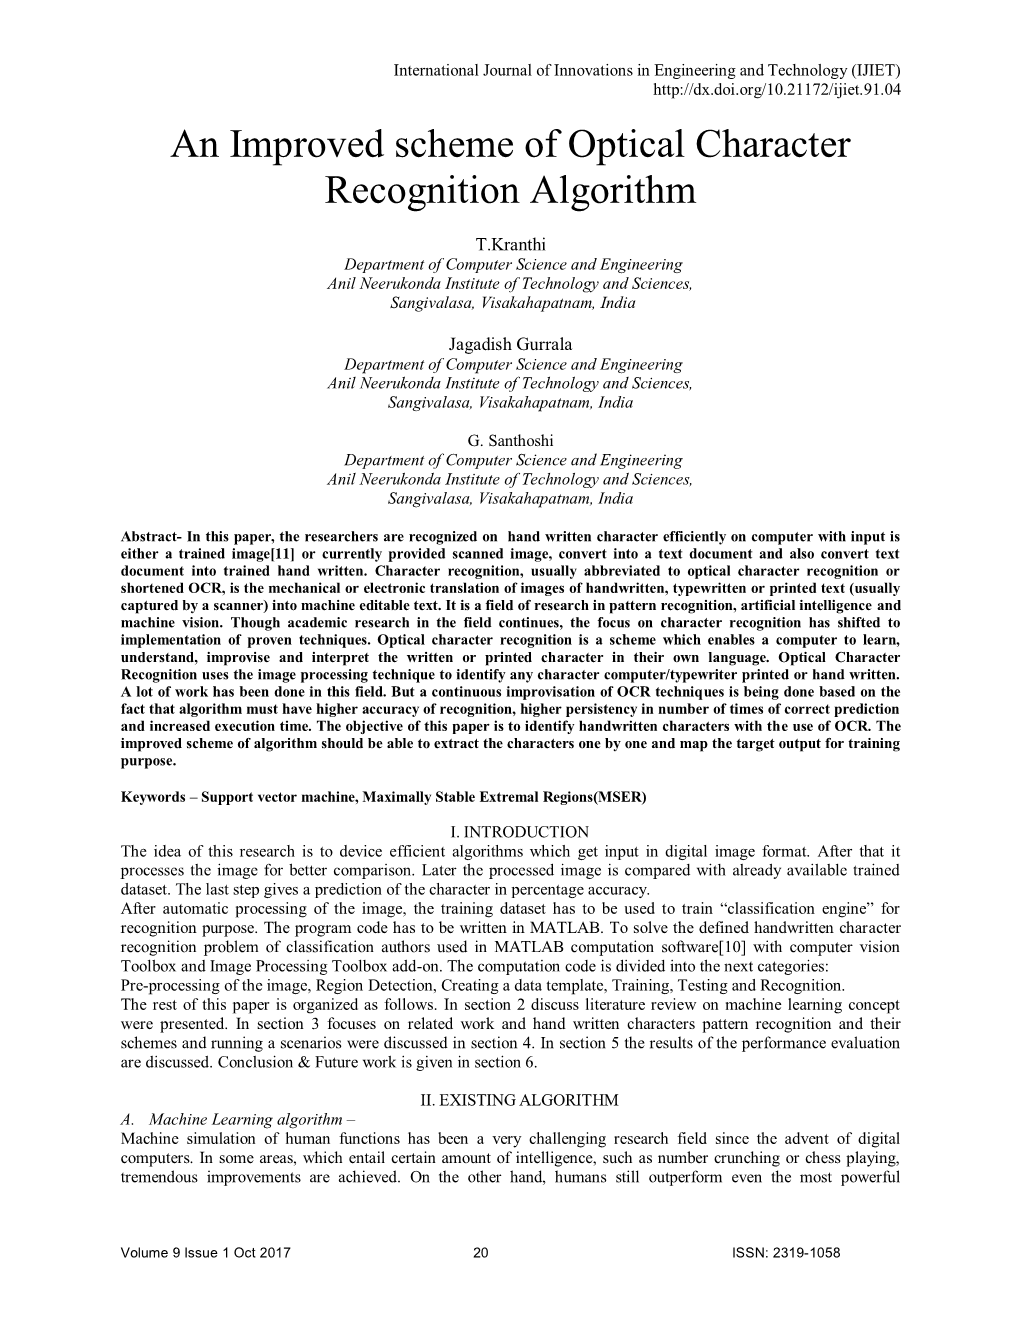 An Improved Scheme of Optical Character Recognition Algorithm